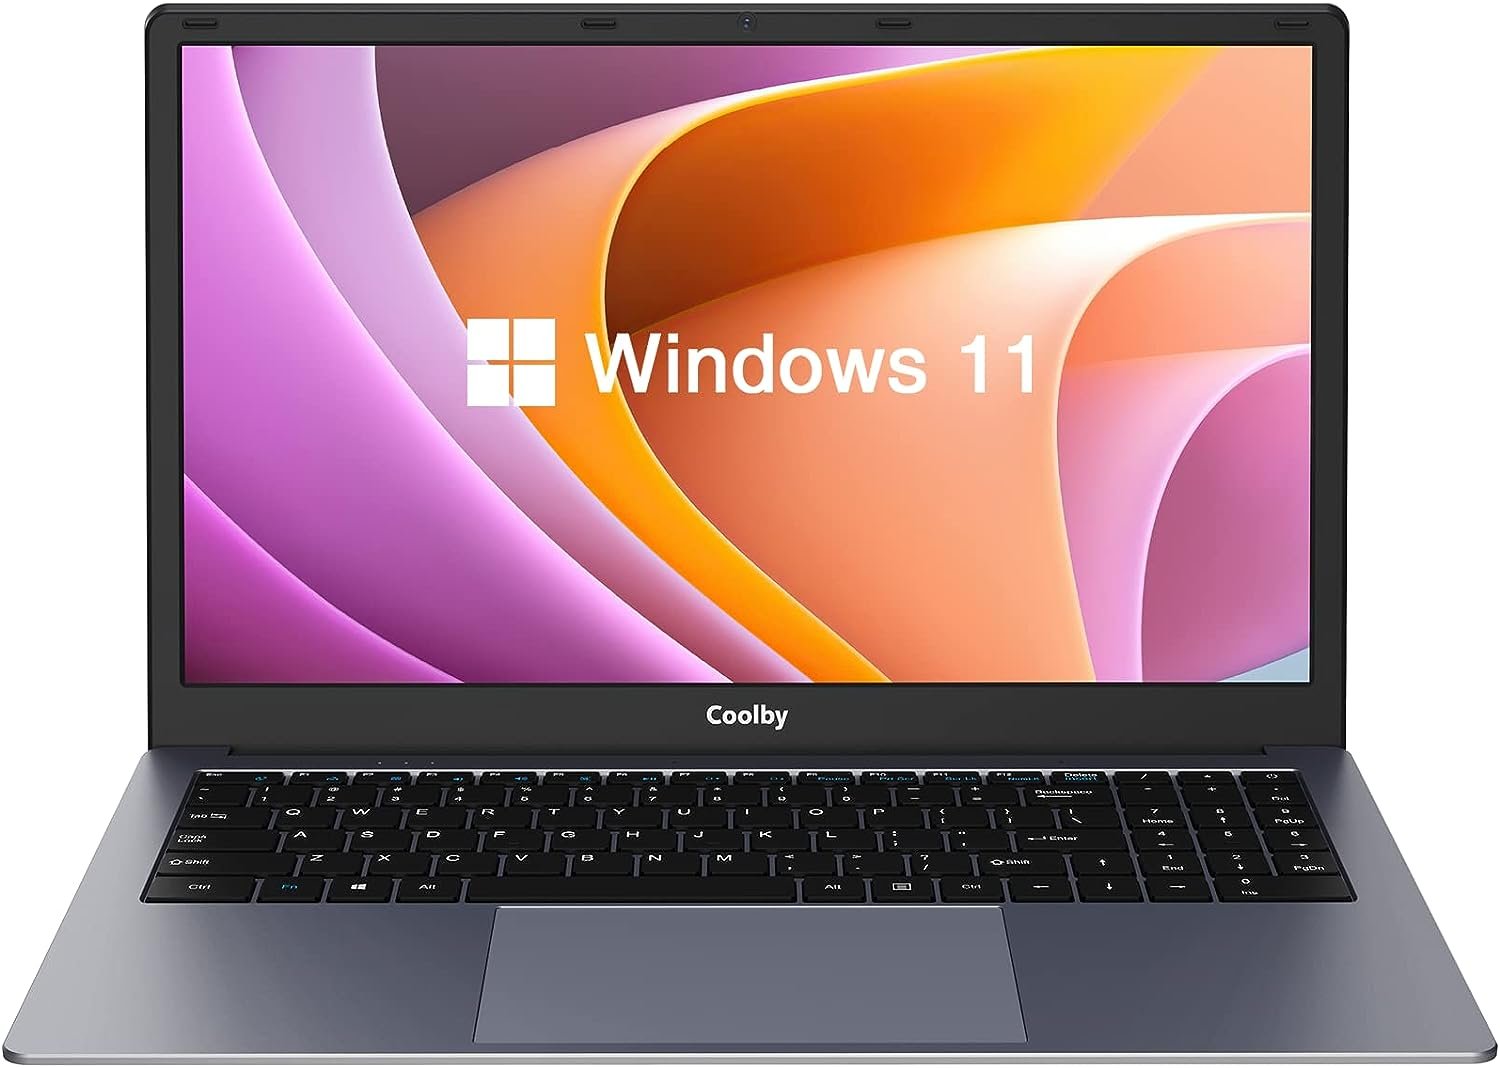 Coolby Windows 11 Laptop Computer